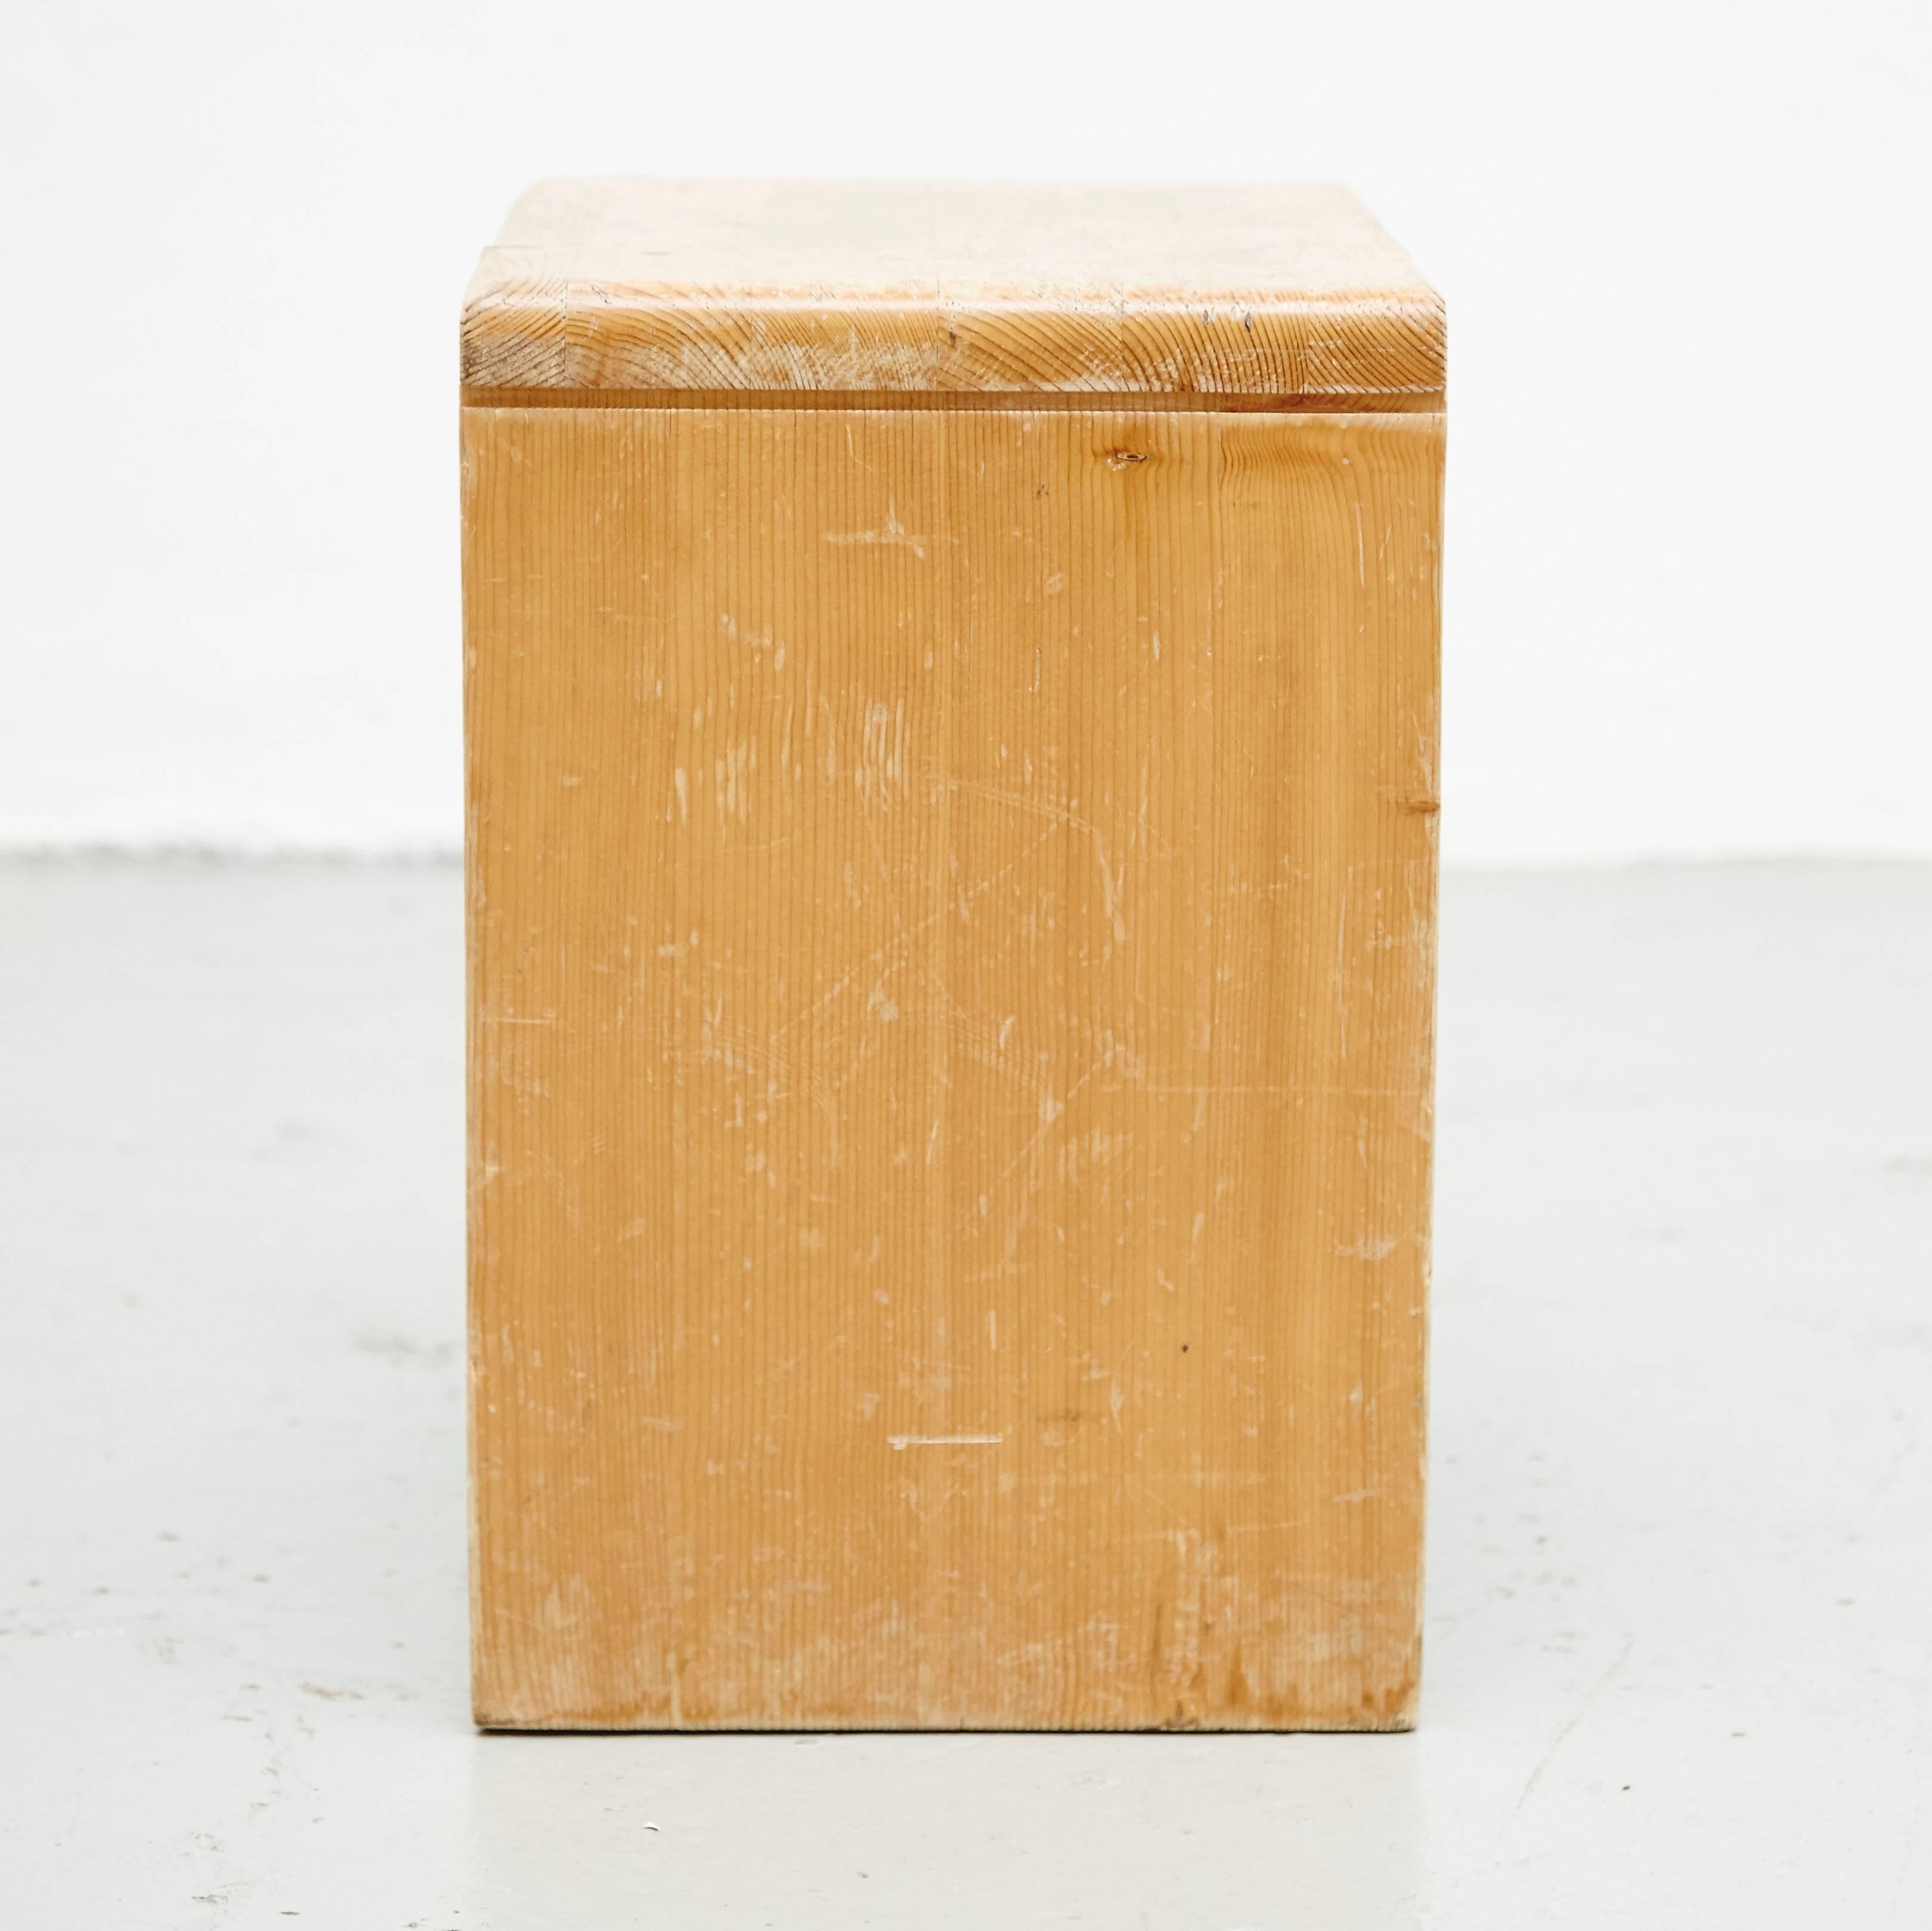 French Charlotte Perriand Mid-Century Modern Pine Wood Stool for Les Arcs